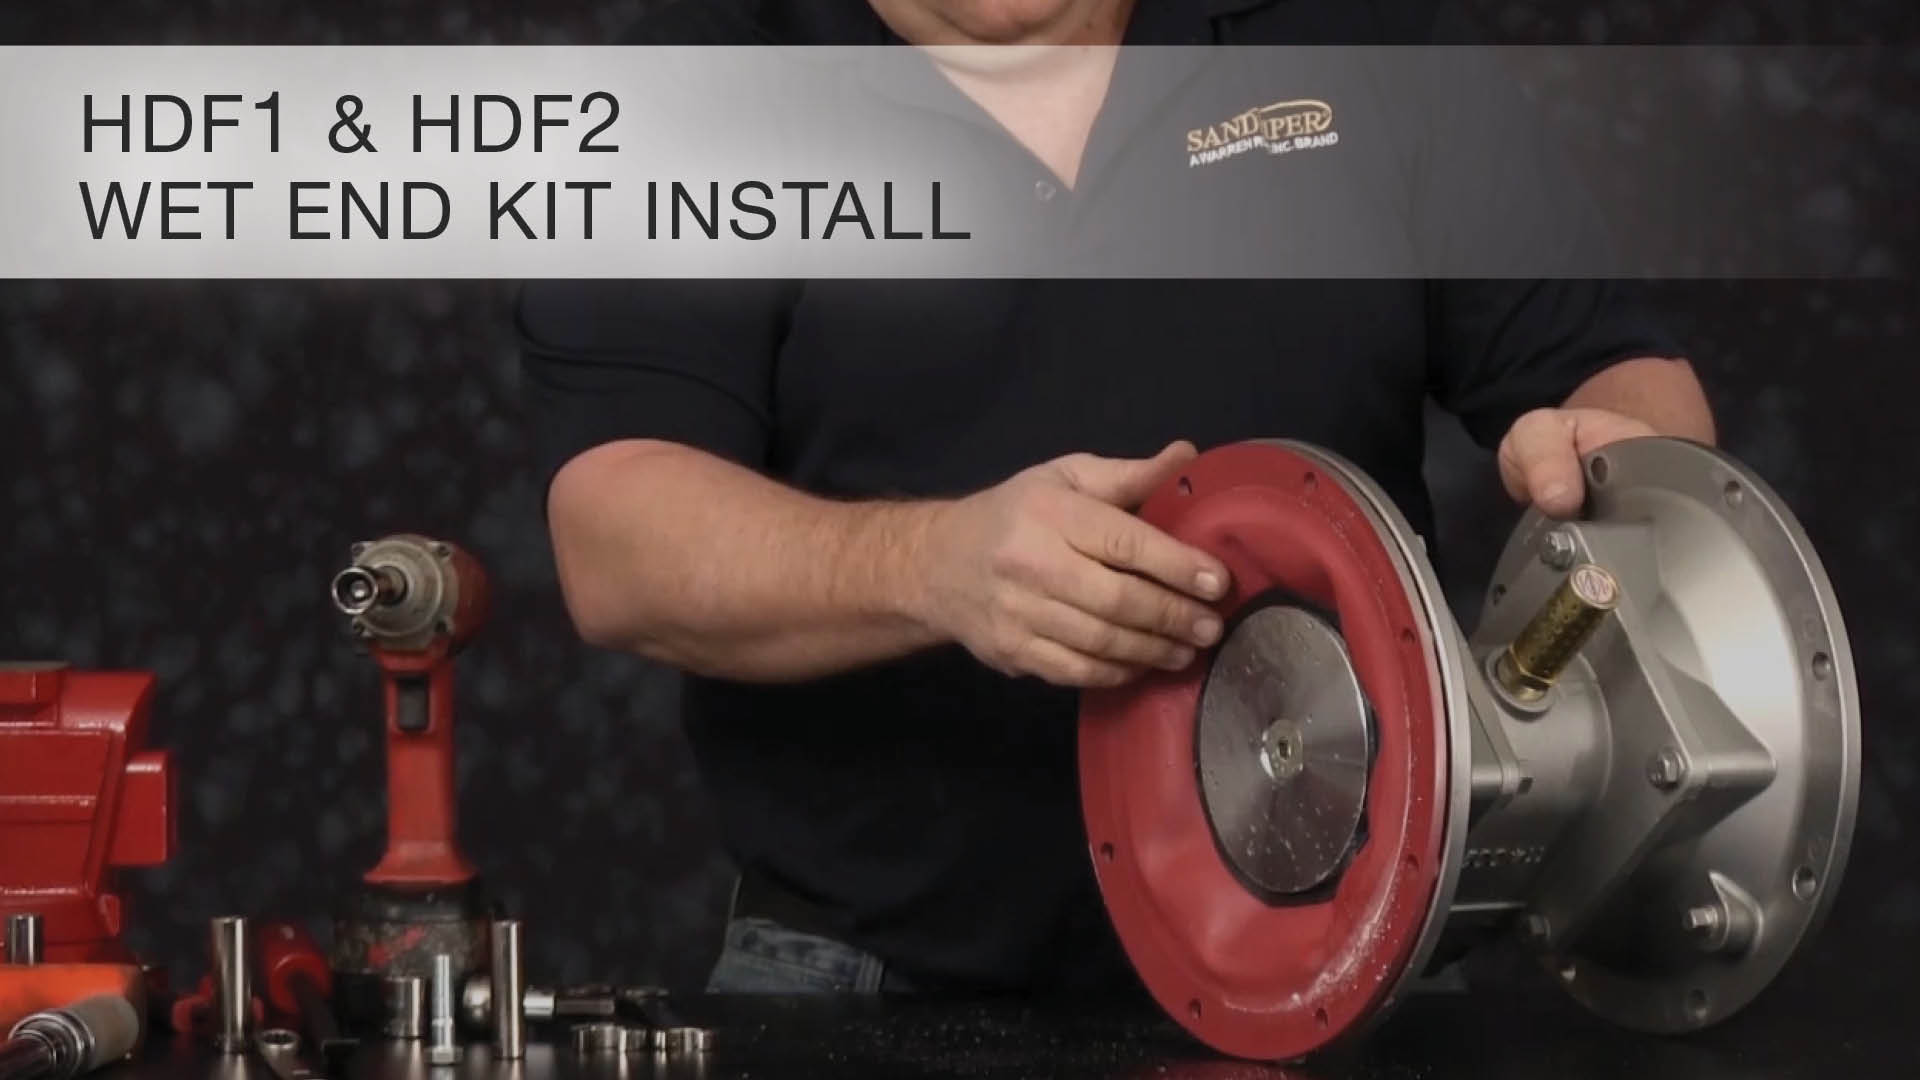 HDF1 and HDF2 Wet End Kit Install